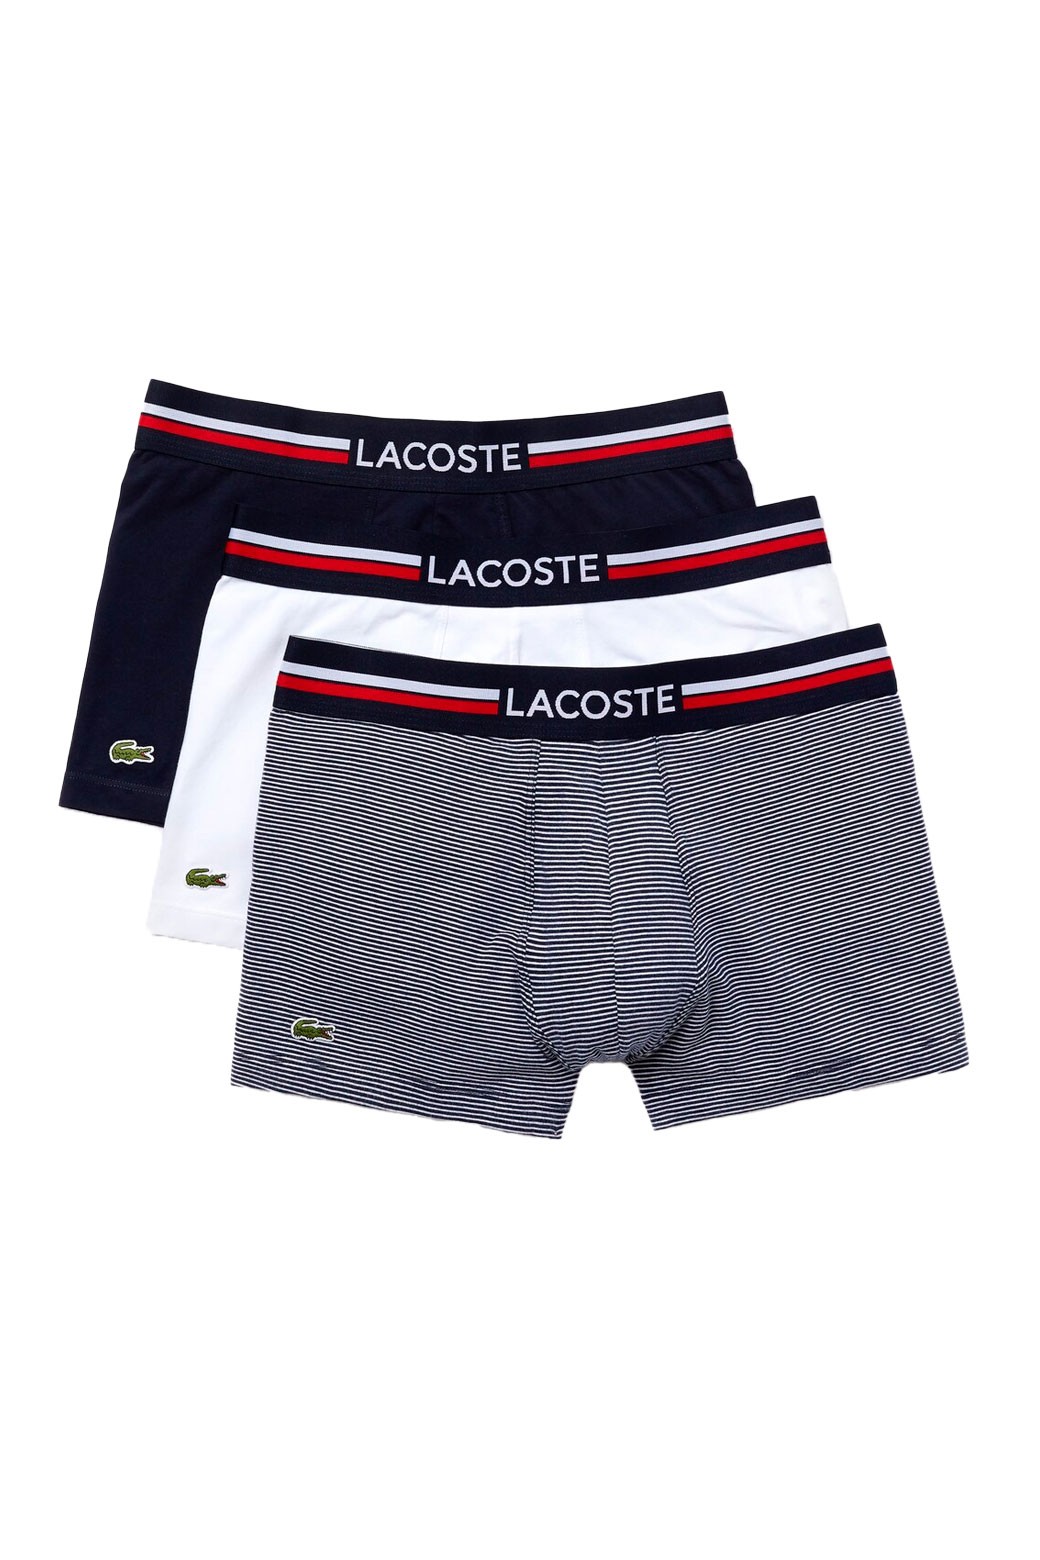 Boxers Lacoste Courts pack 3 Azul y blanco